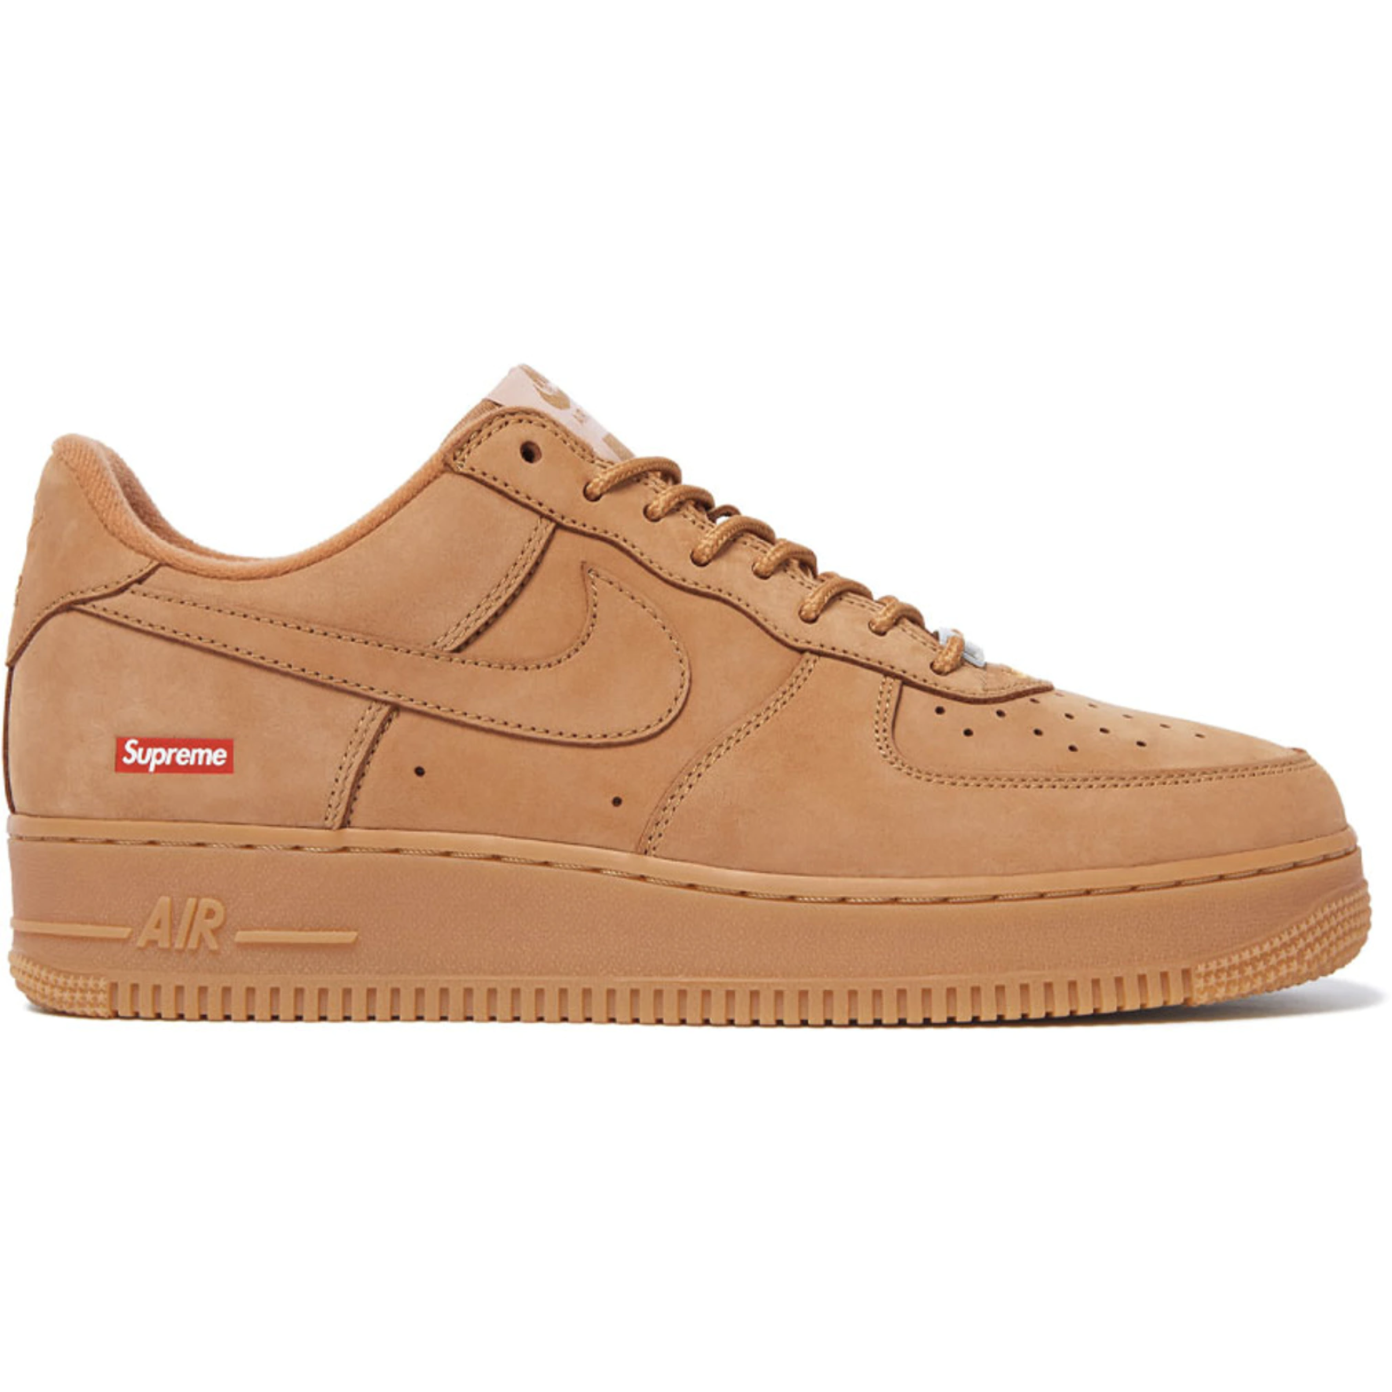 Nike Air Force 1 Low SP Supreme Wheat by Nike from £200.00